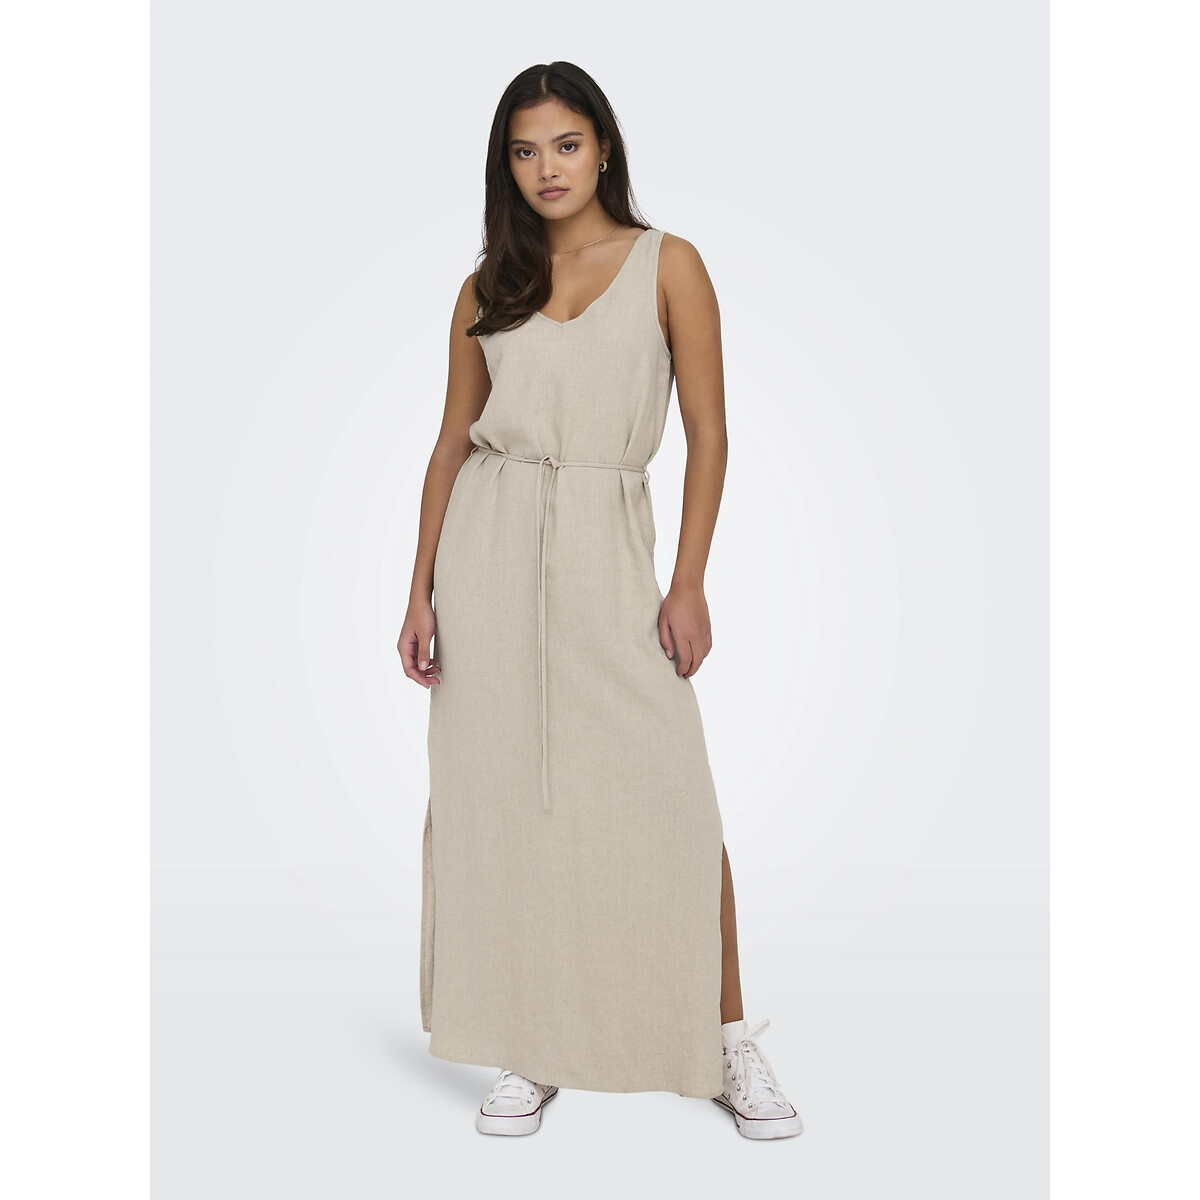 Image of Sleeveless Maxi Dress in Linen Mix with Tie-Waist and V-Neck